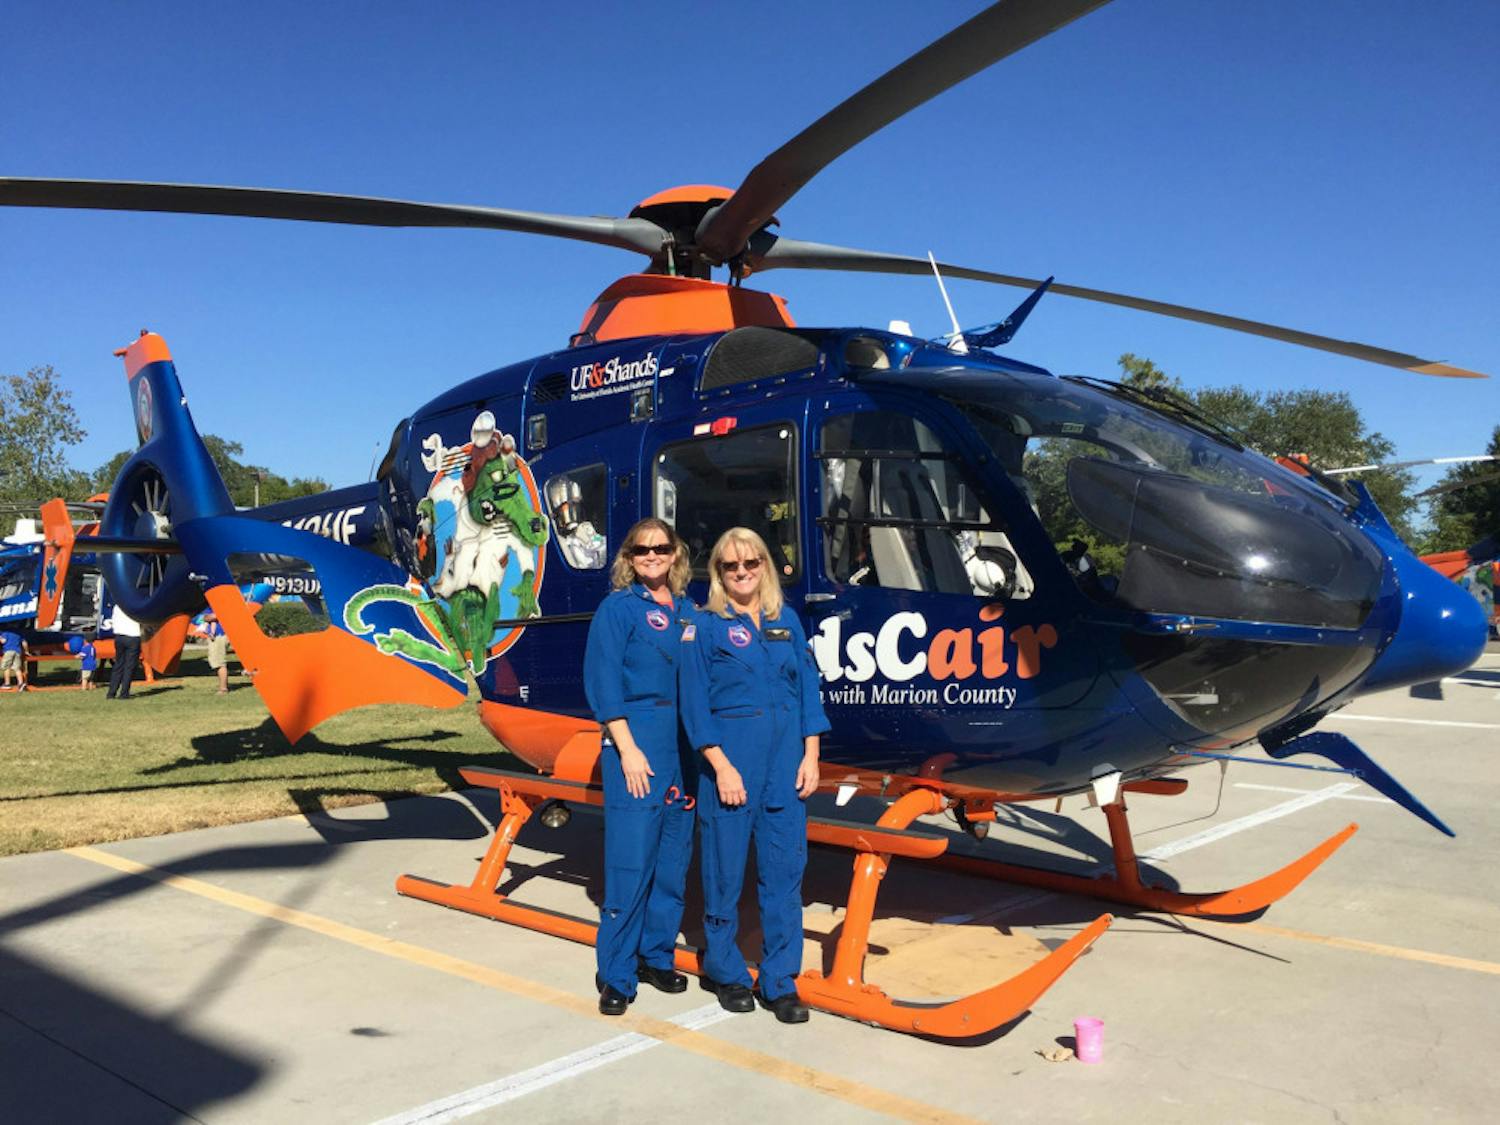 ShandsCair 2, an EC13-model helicopter, sits in the sun during the 35th anniversary celebration of UF Health’s ShandsCair on Saturday. It is just one of three helicopters used to transport patients from the scene to the UF Health Shands Hospital, a level-one trauma center.